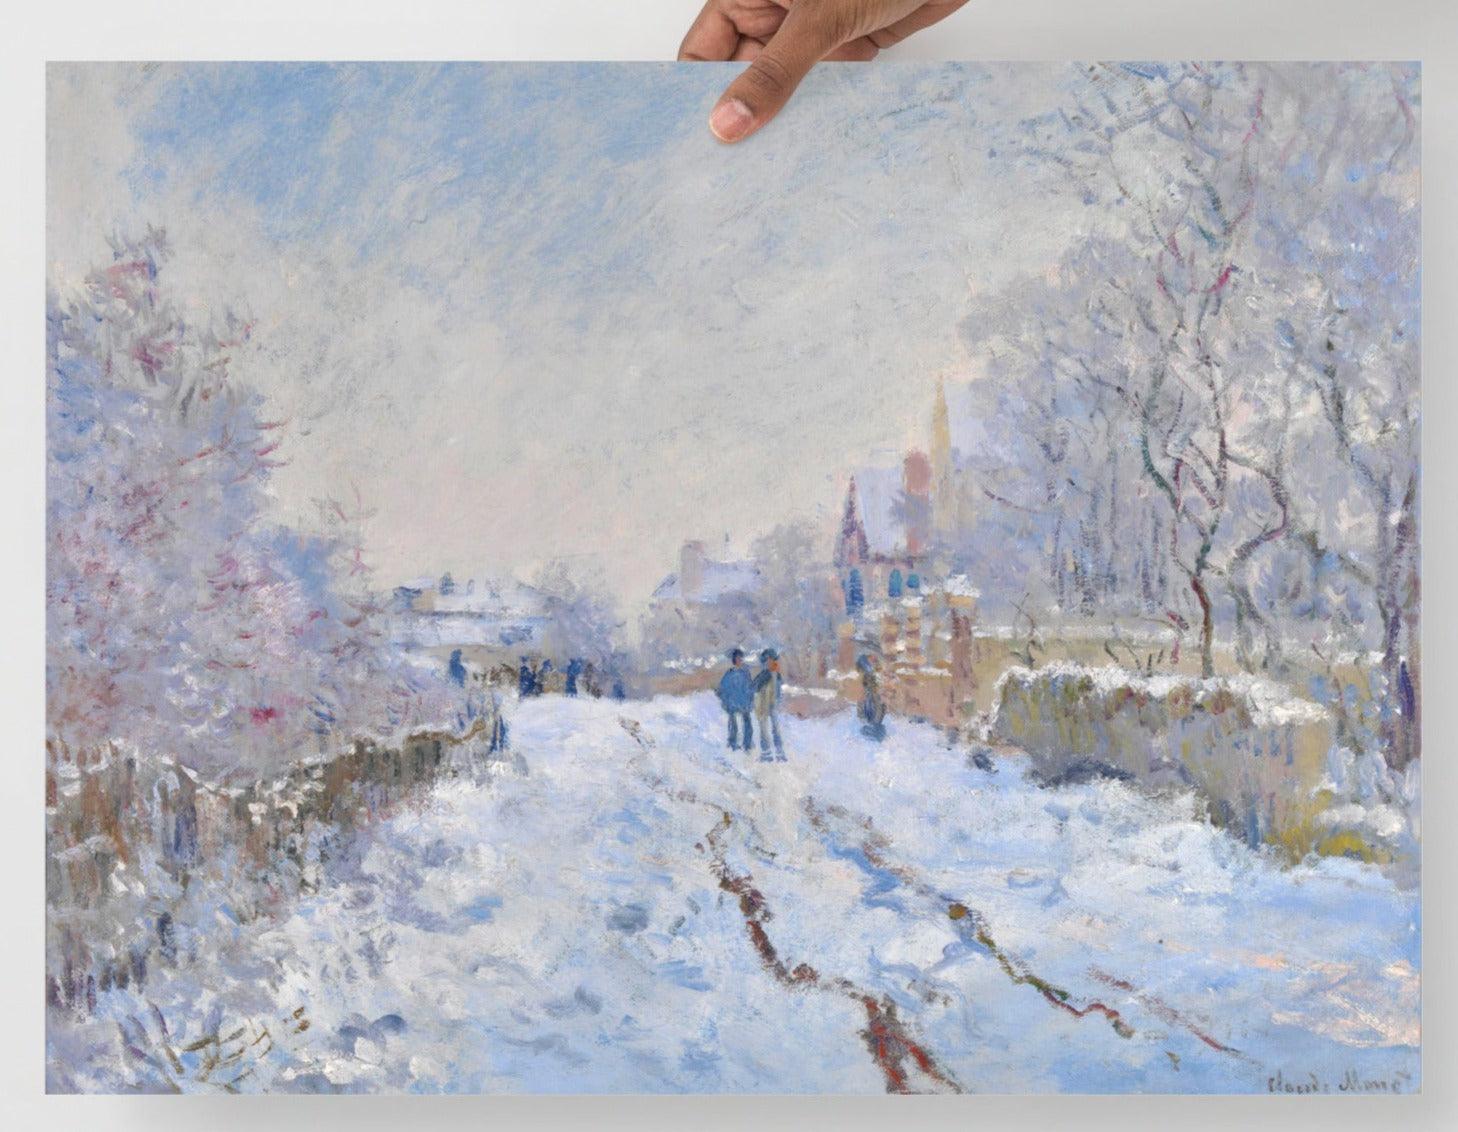 A Snow at Argenteuil by Claude Monet  poster on a plain backdrop in size 18x24”.